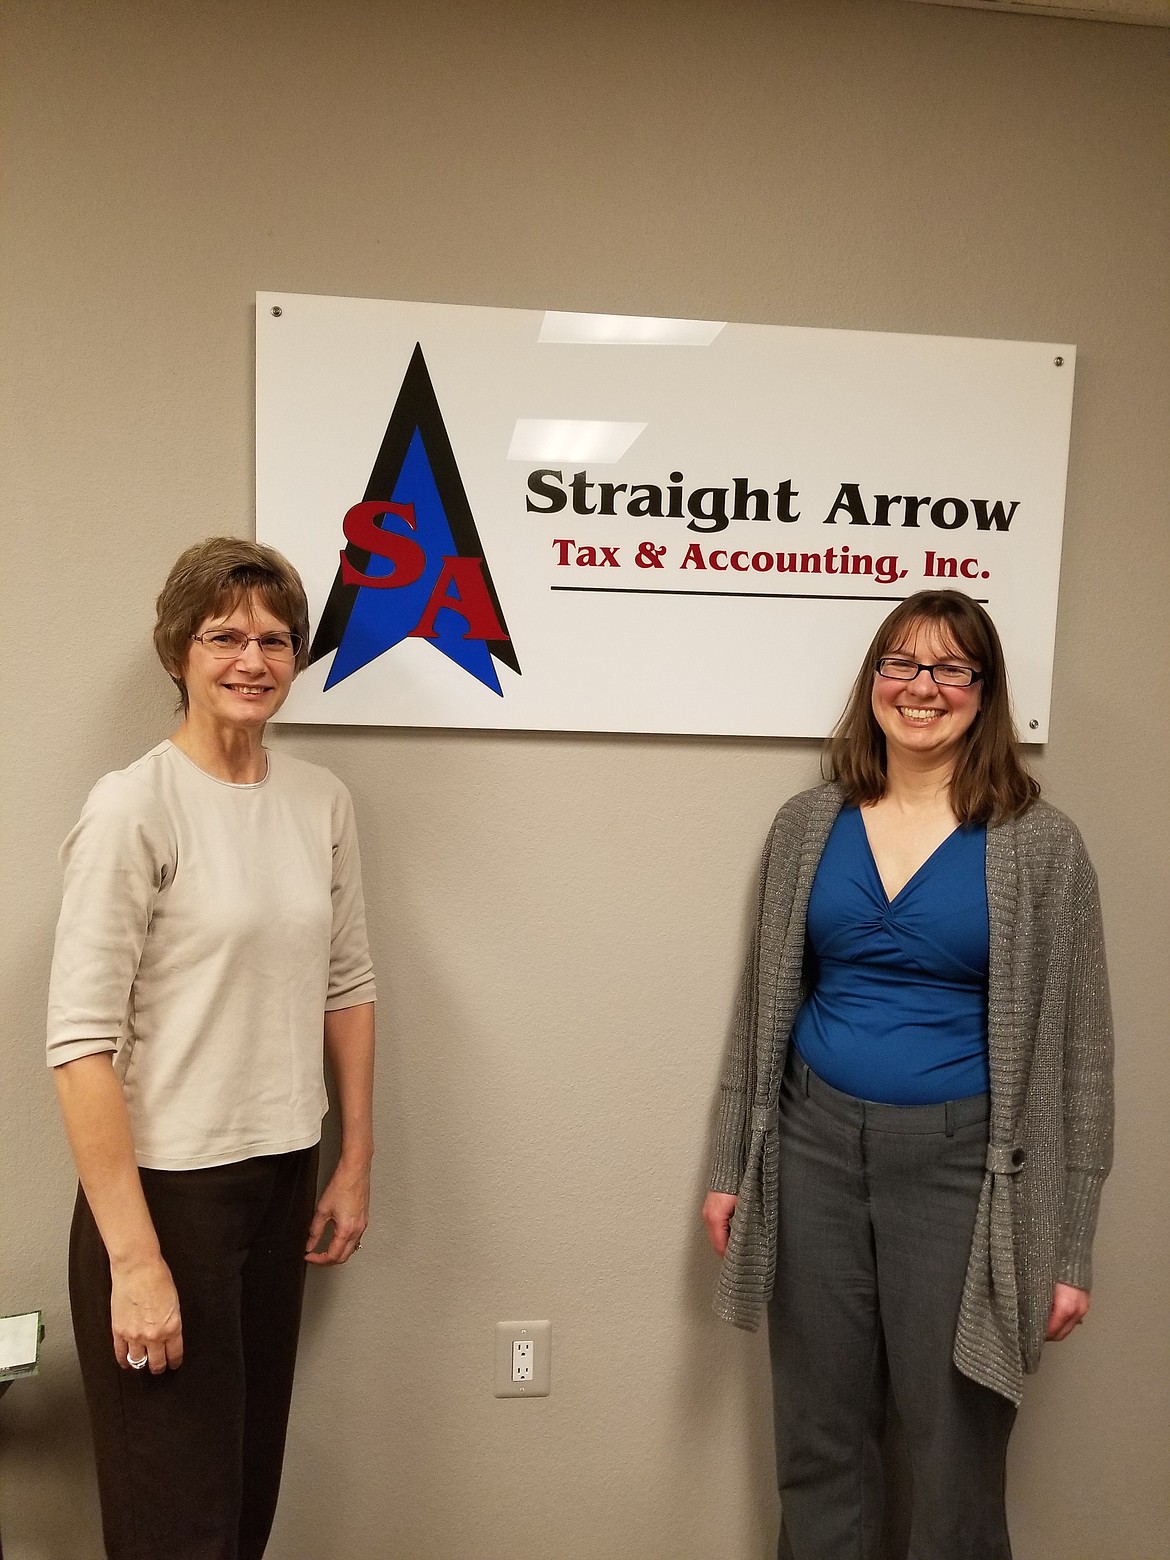 Karen Alberts and Shannon Spraker with Straight Arrow Tax &amp; Accounting, located on Government Way in Hayden.

Courtesy photo